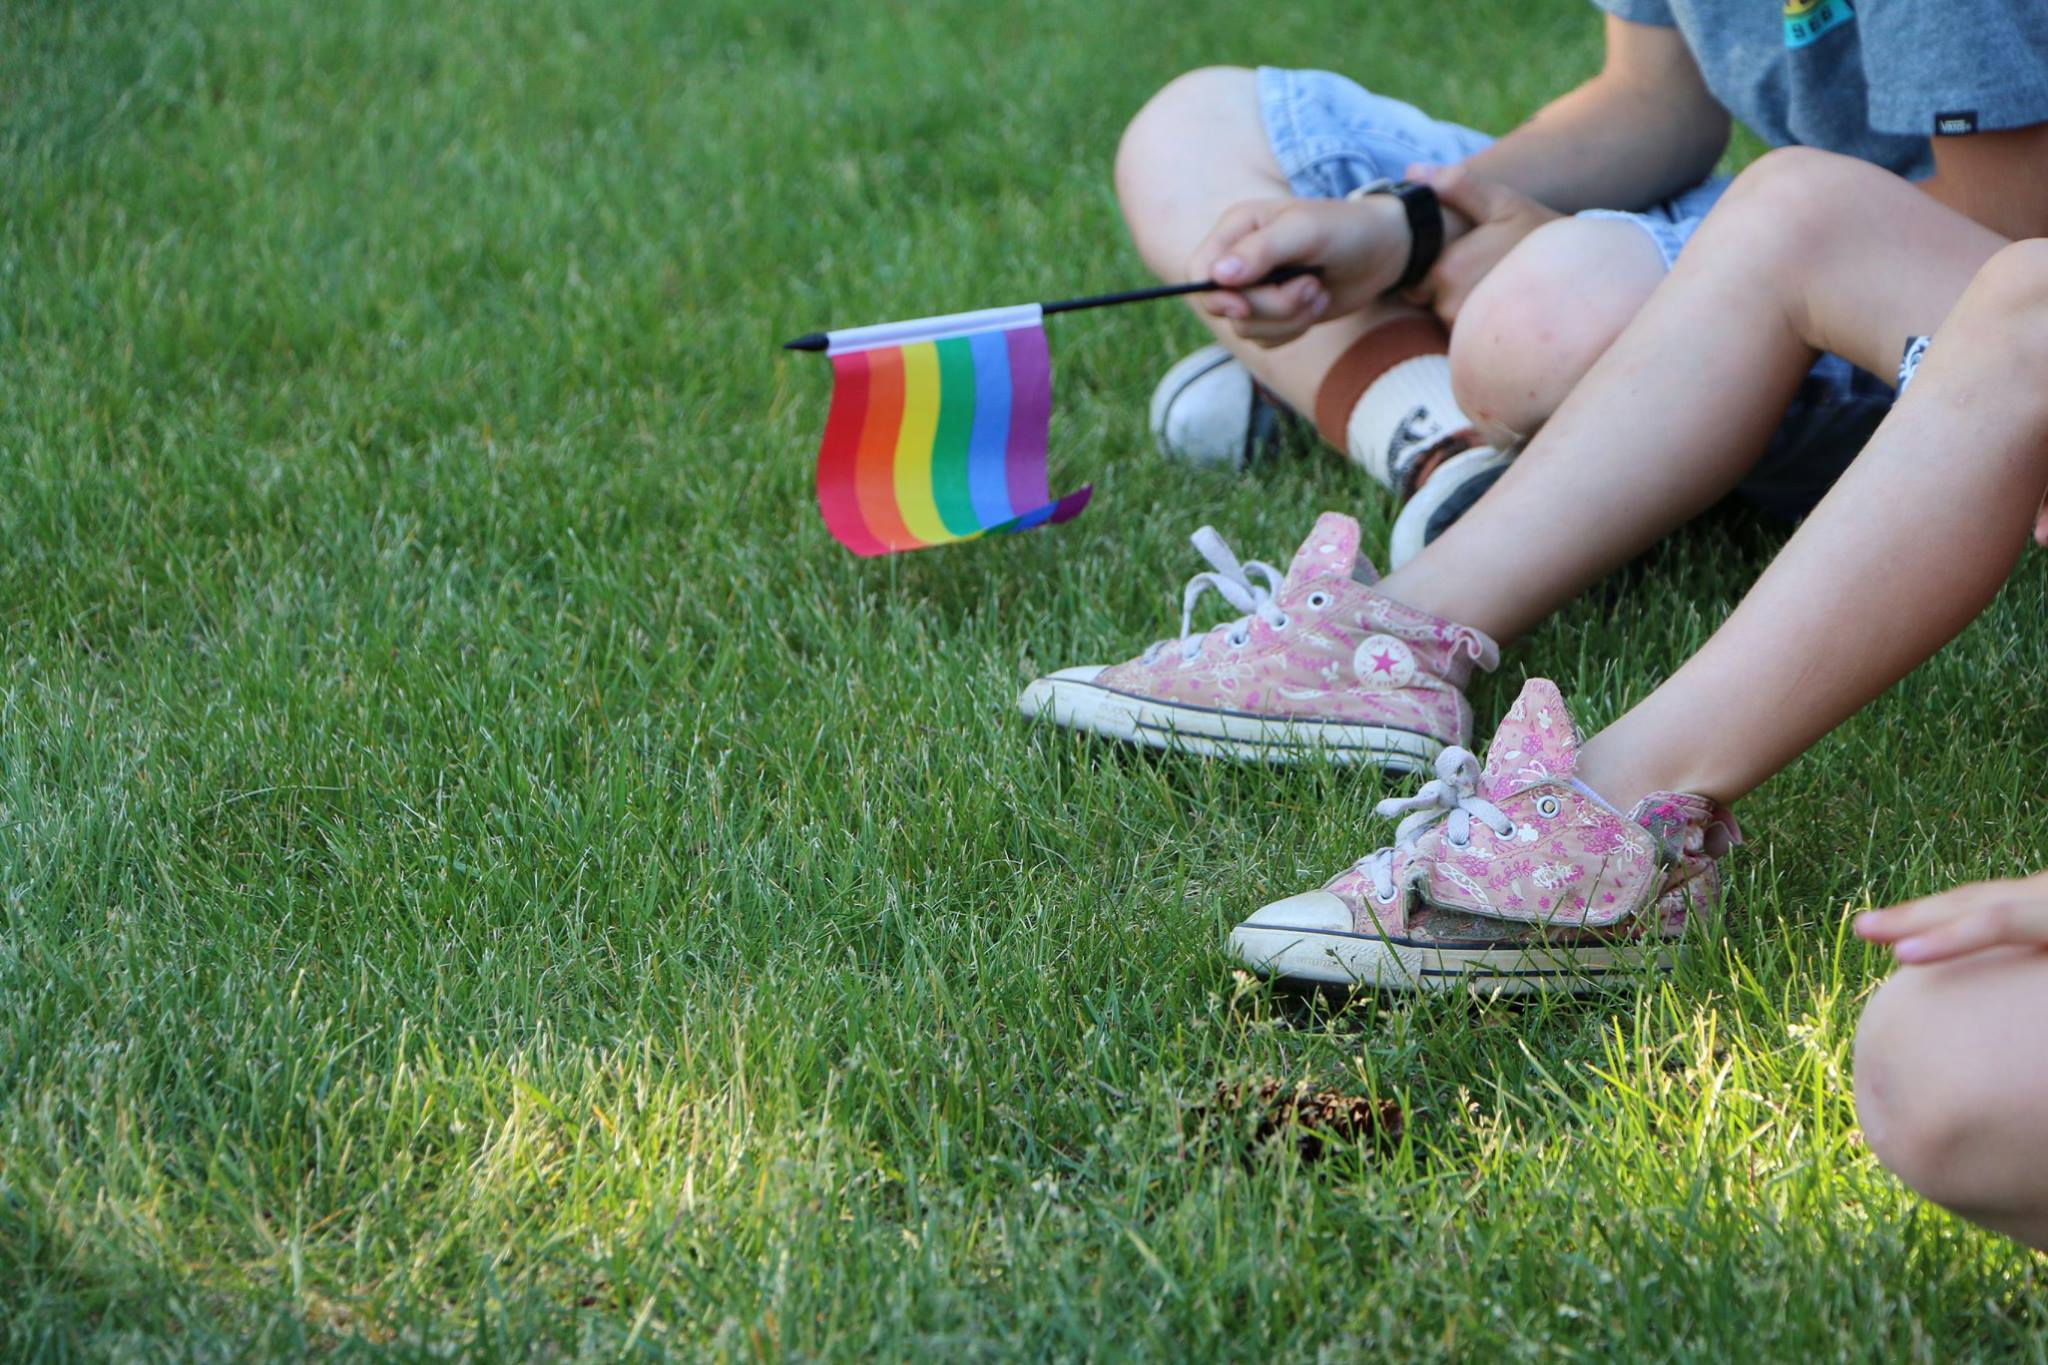 Children sitting on the grass holding a small pride Flag - June 1, 2019.